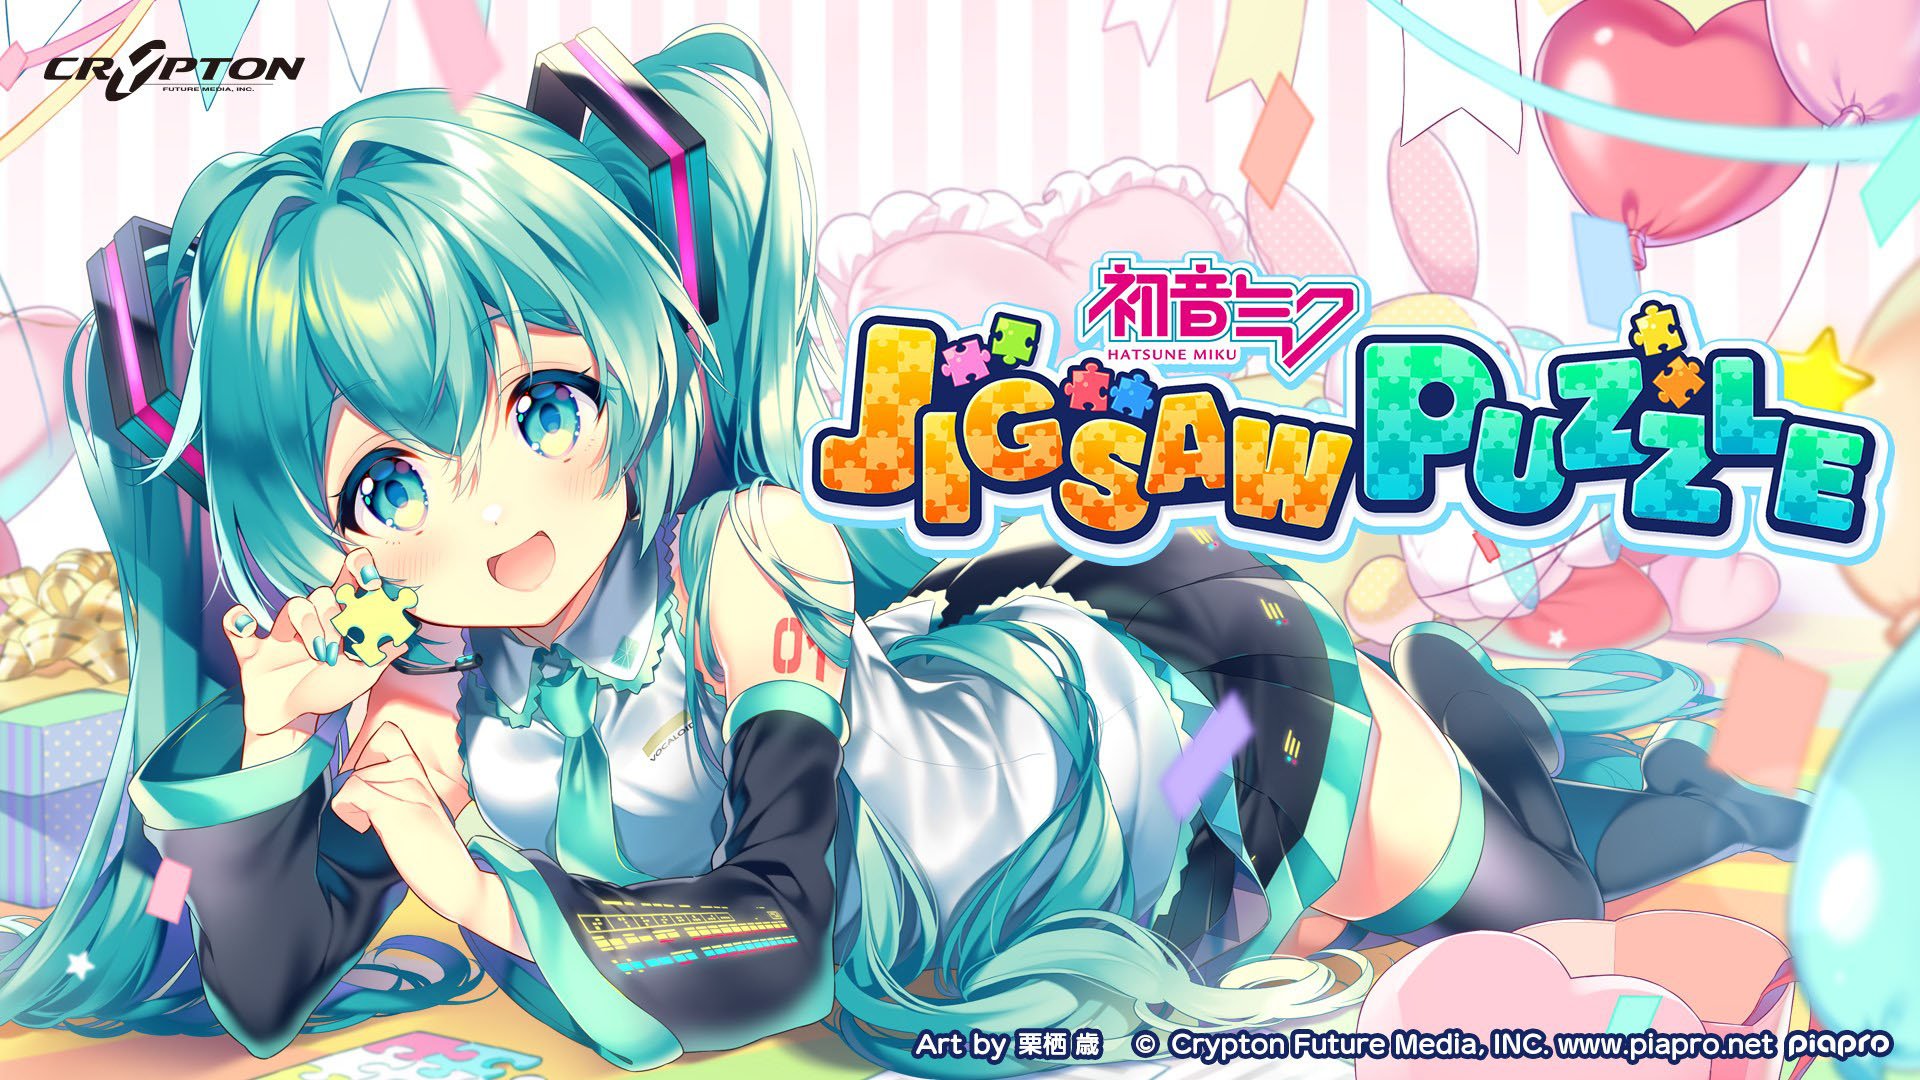 #
      Hatsune Miku Jigsaw Puzzle coming to Xbox One, PC on June 23